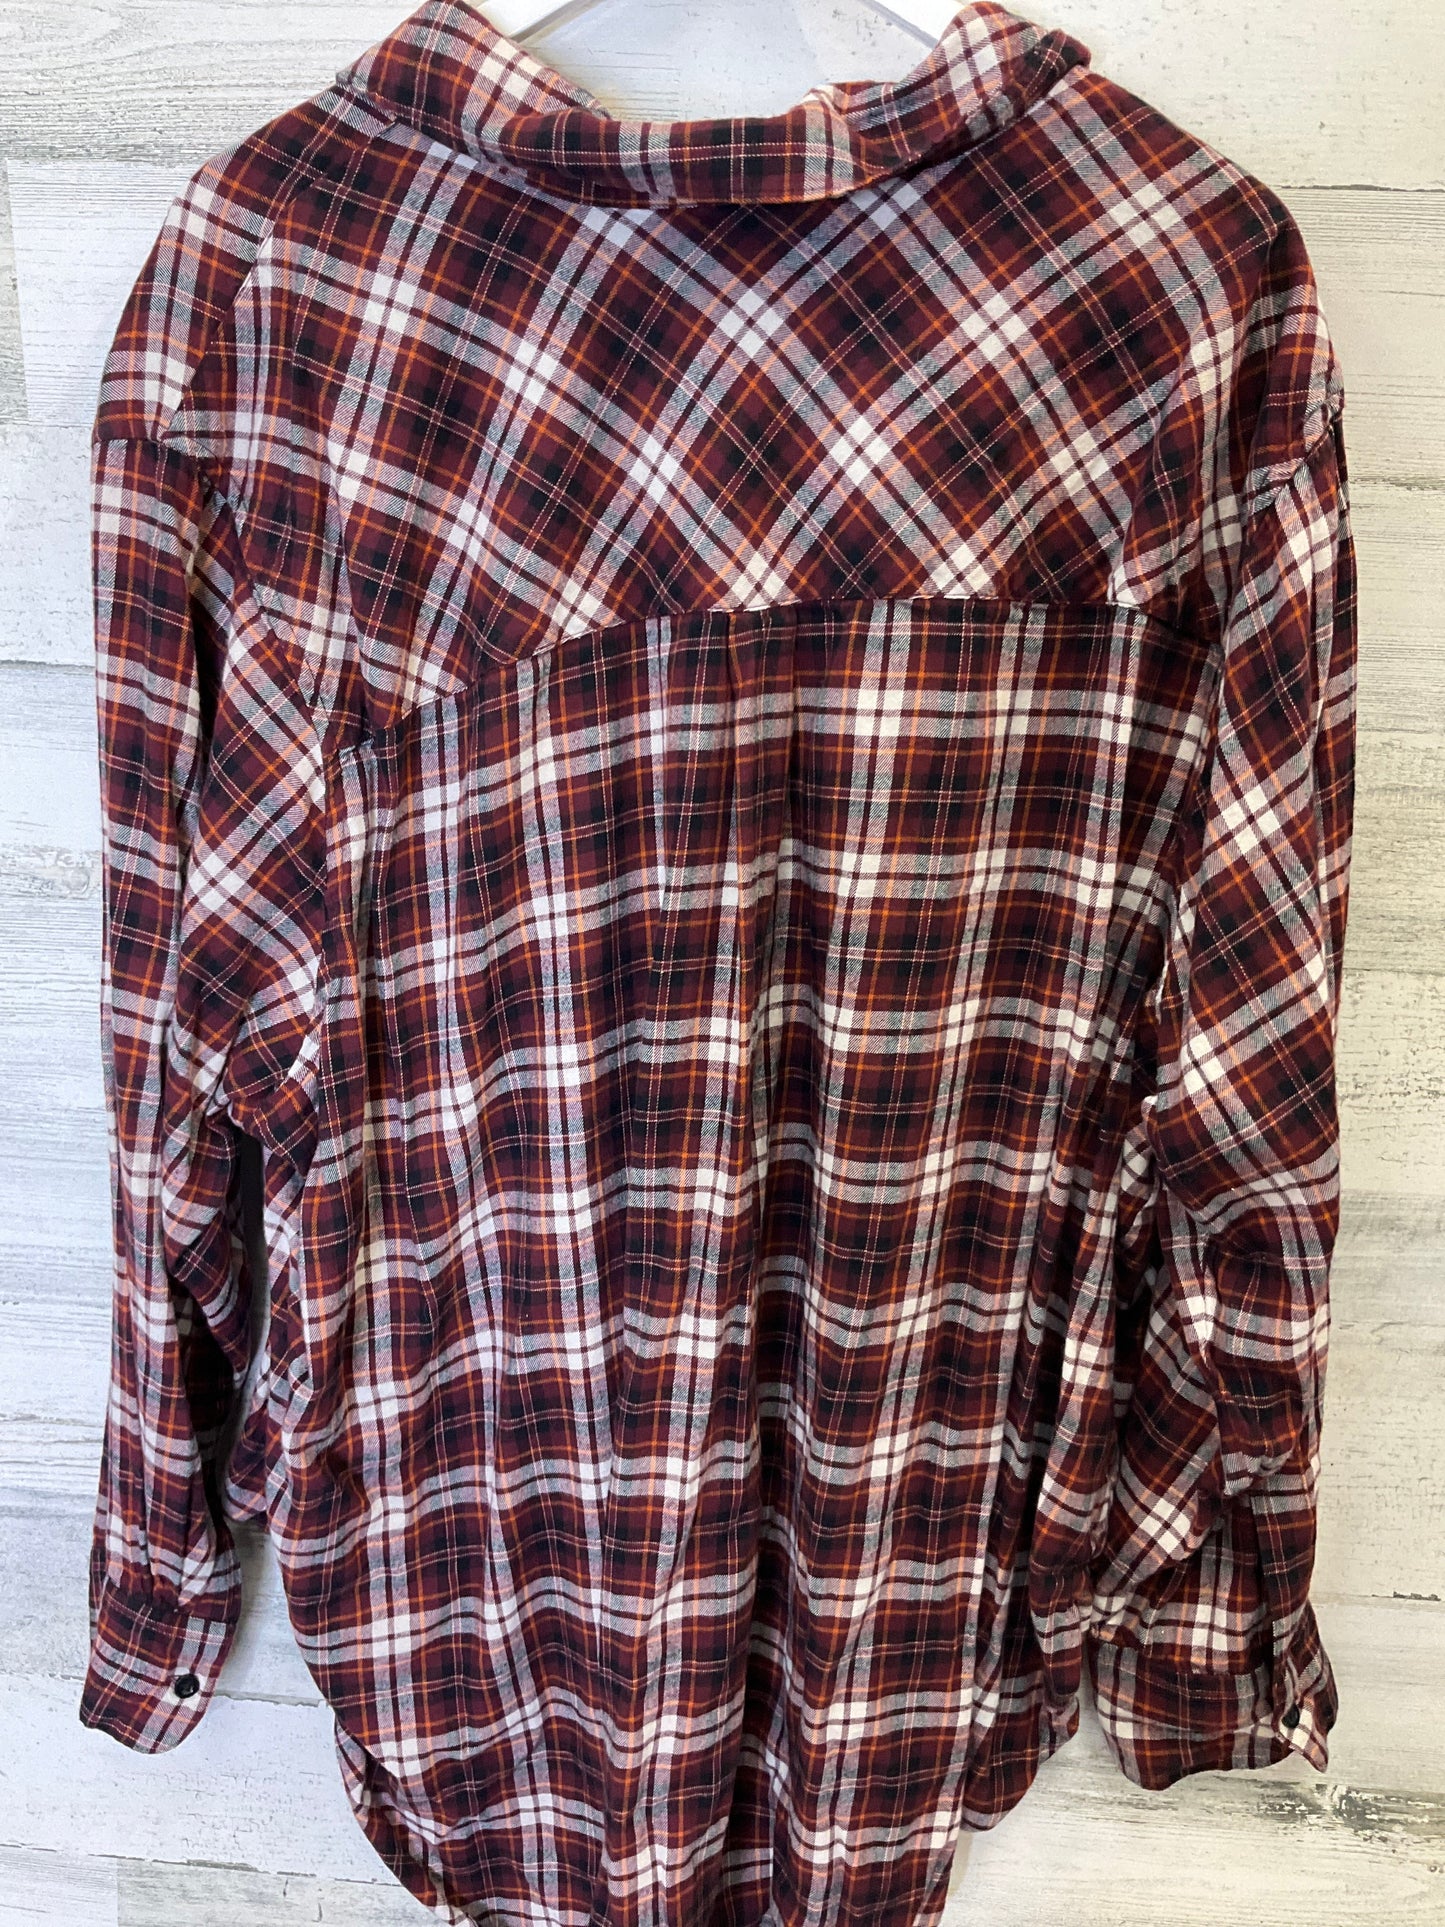 Red Top Long Sleeve Lane Bryant, Size 4x